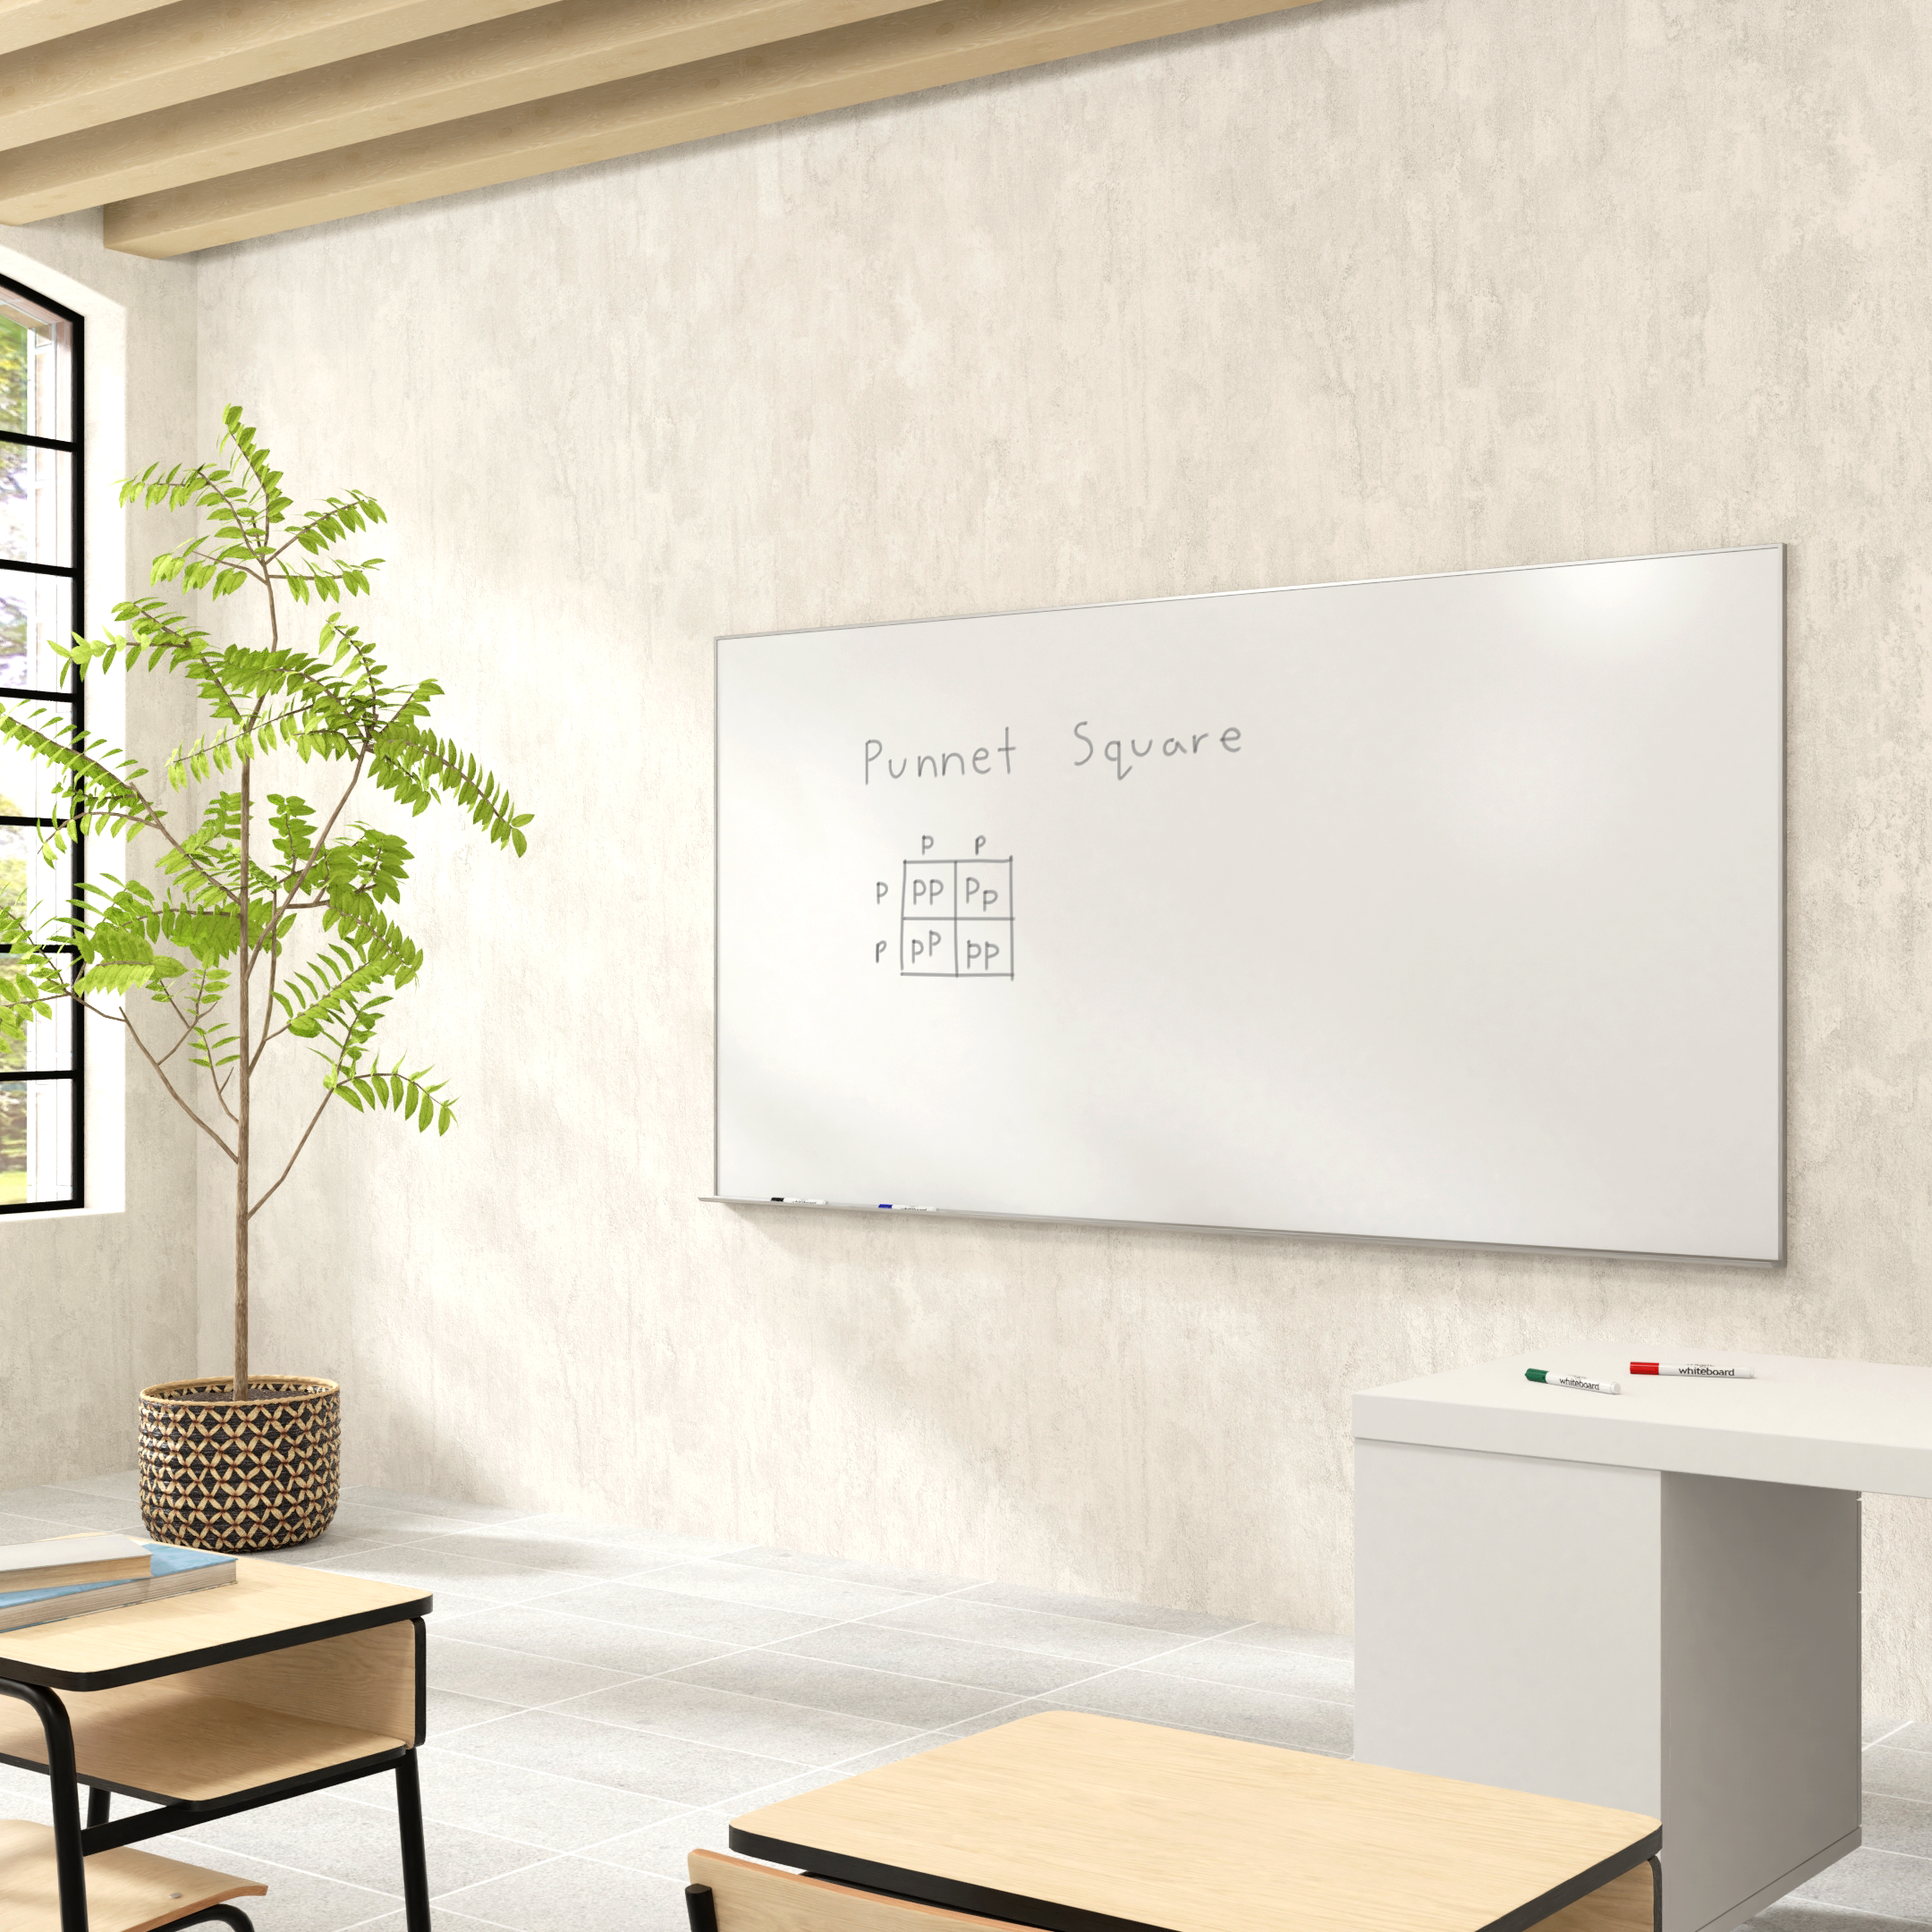 Concept Wall-Mounted Boards - Calyx by Claridge